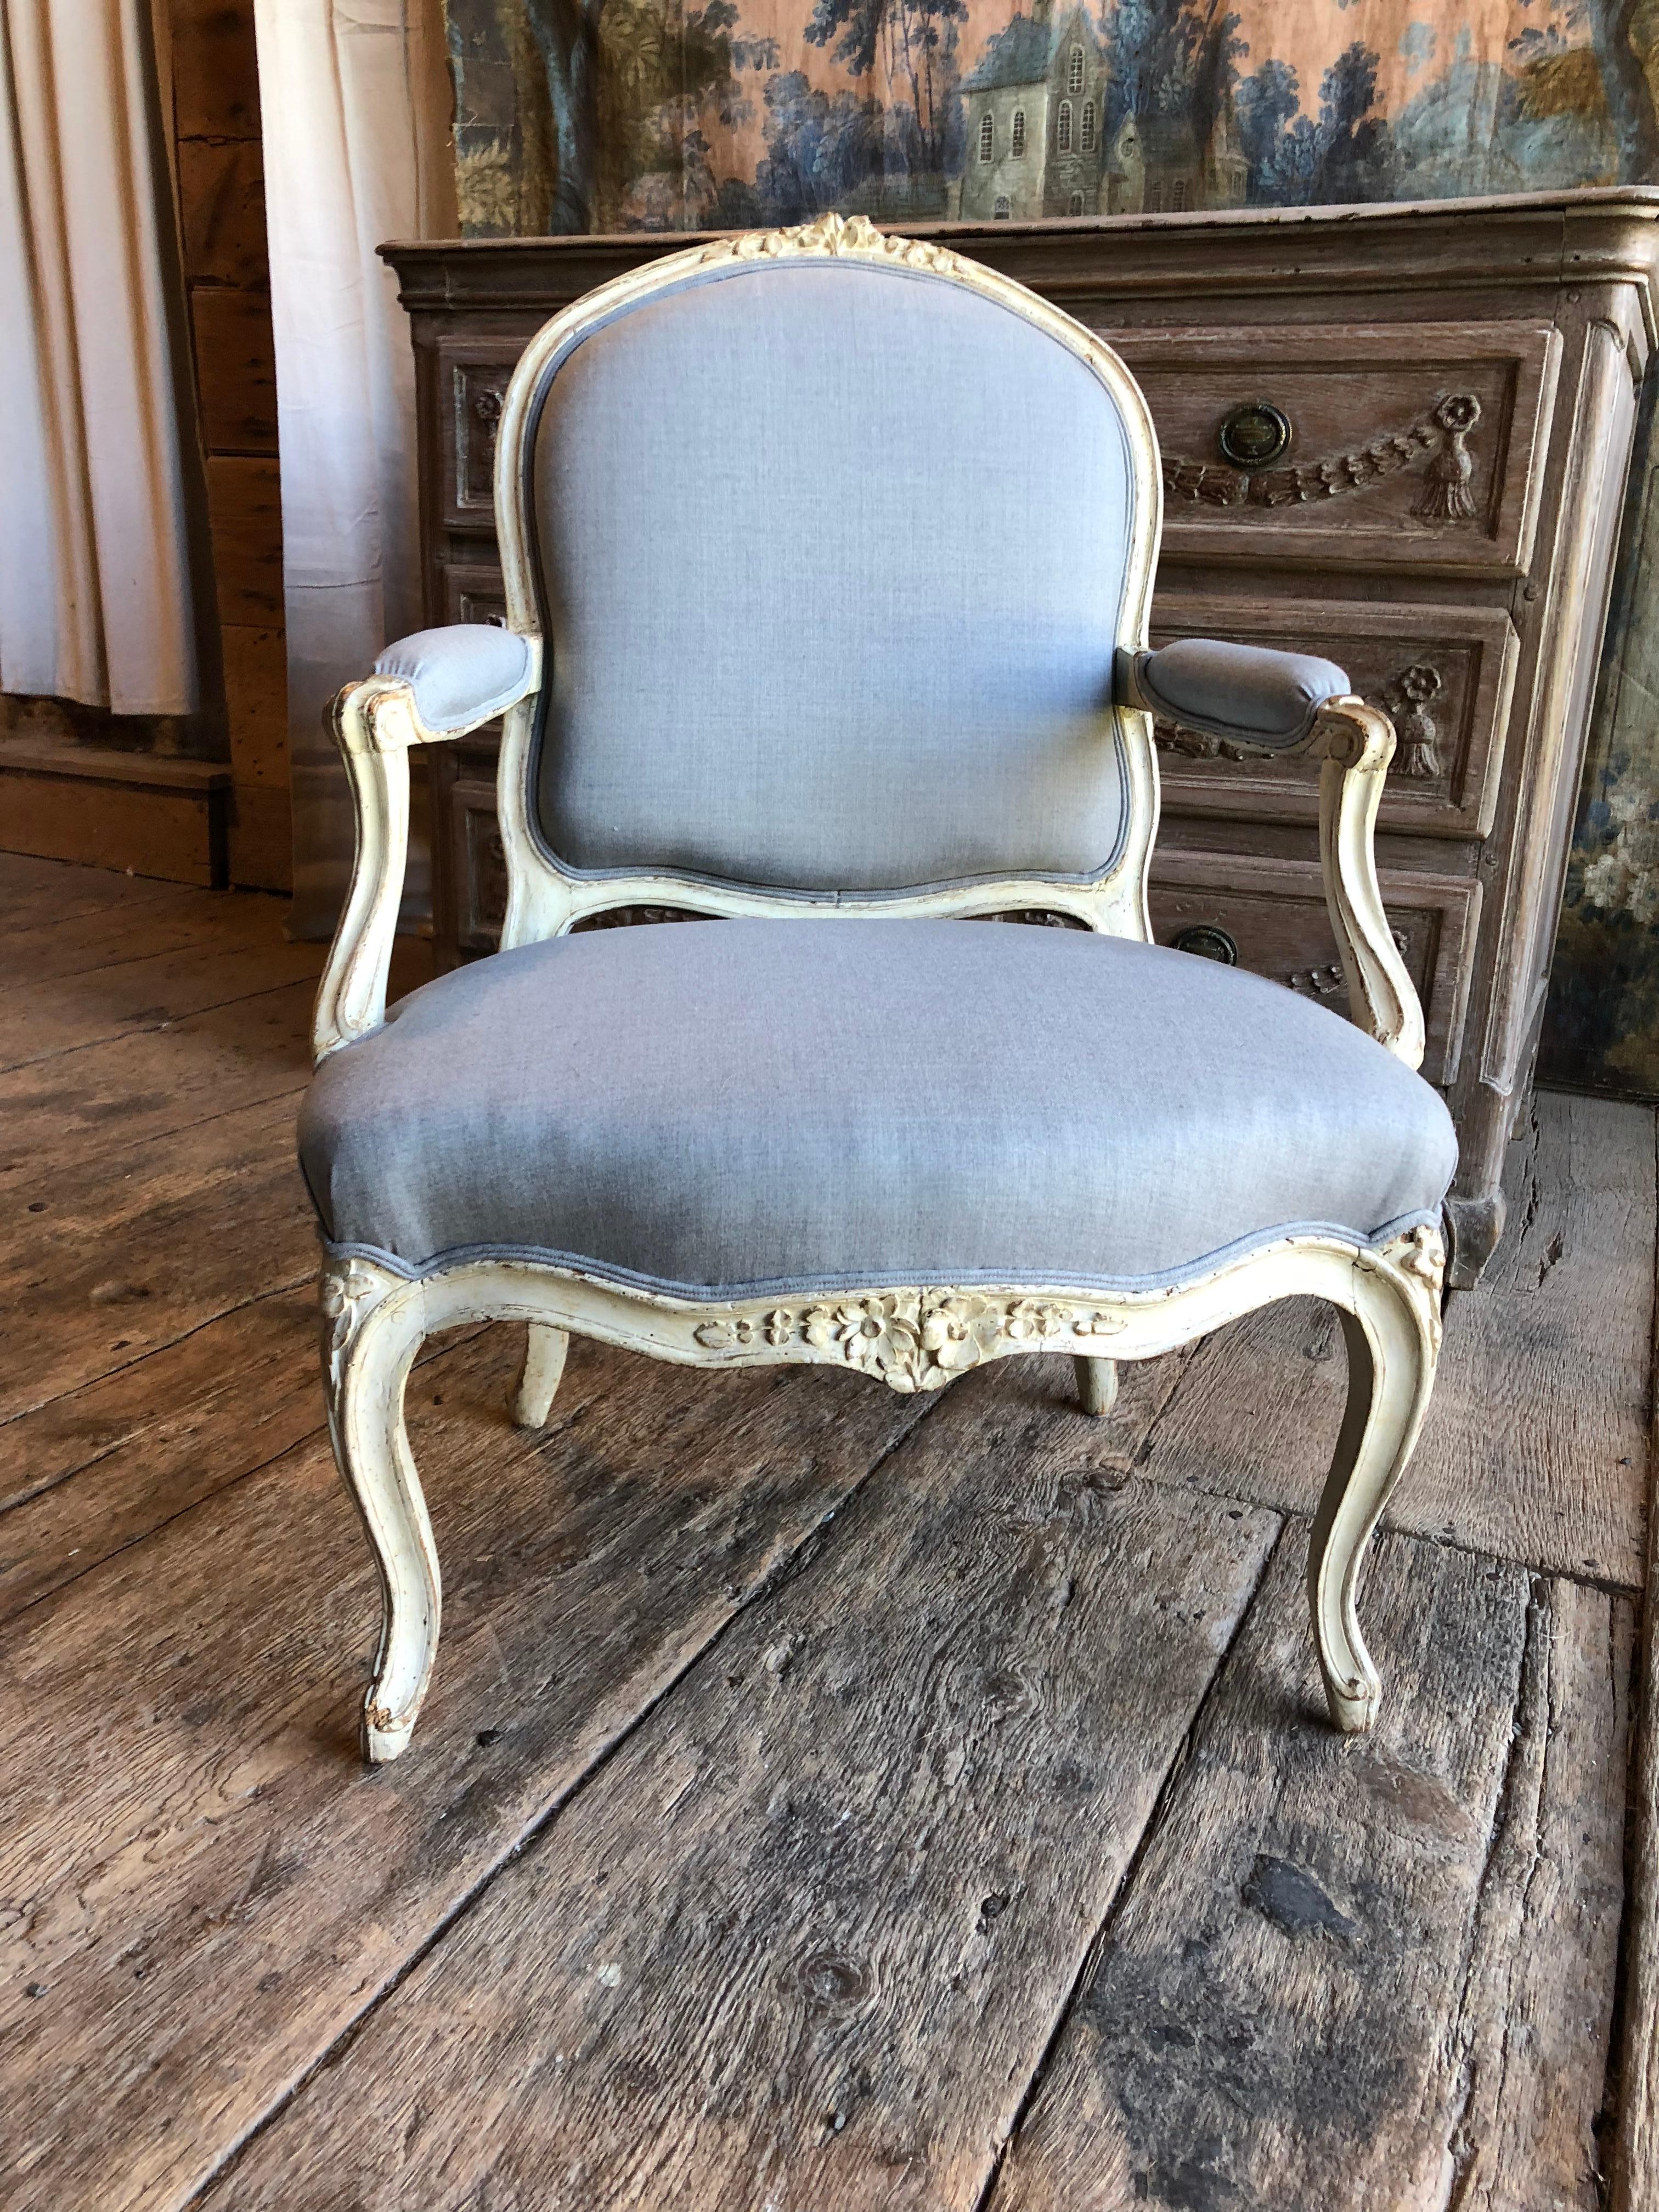 A charming Louis XV period fauteuil cabriolet in its original painted finish, with floral carvings on the back and seat rail, cabriole legs and a scalloped apron. Recently upholstered in grey/blue linen fabric. French, circa 1760.